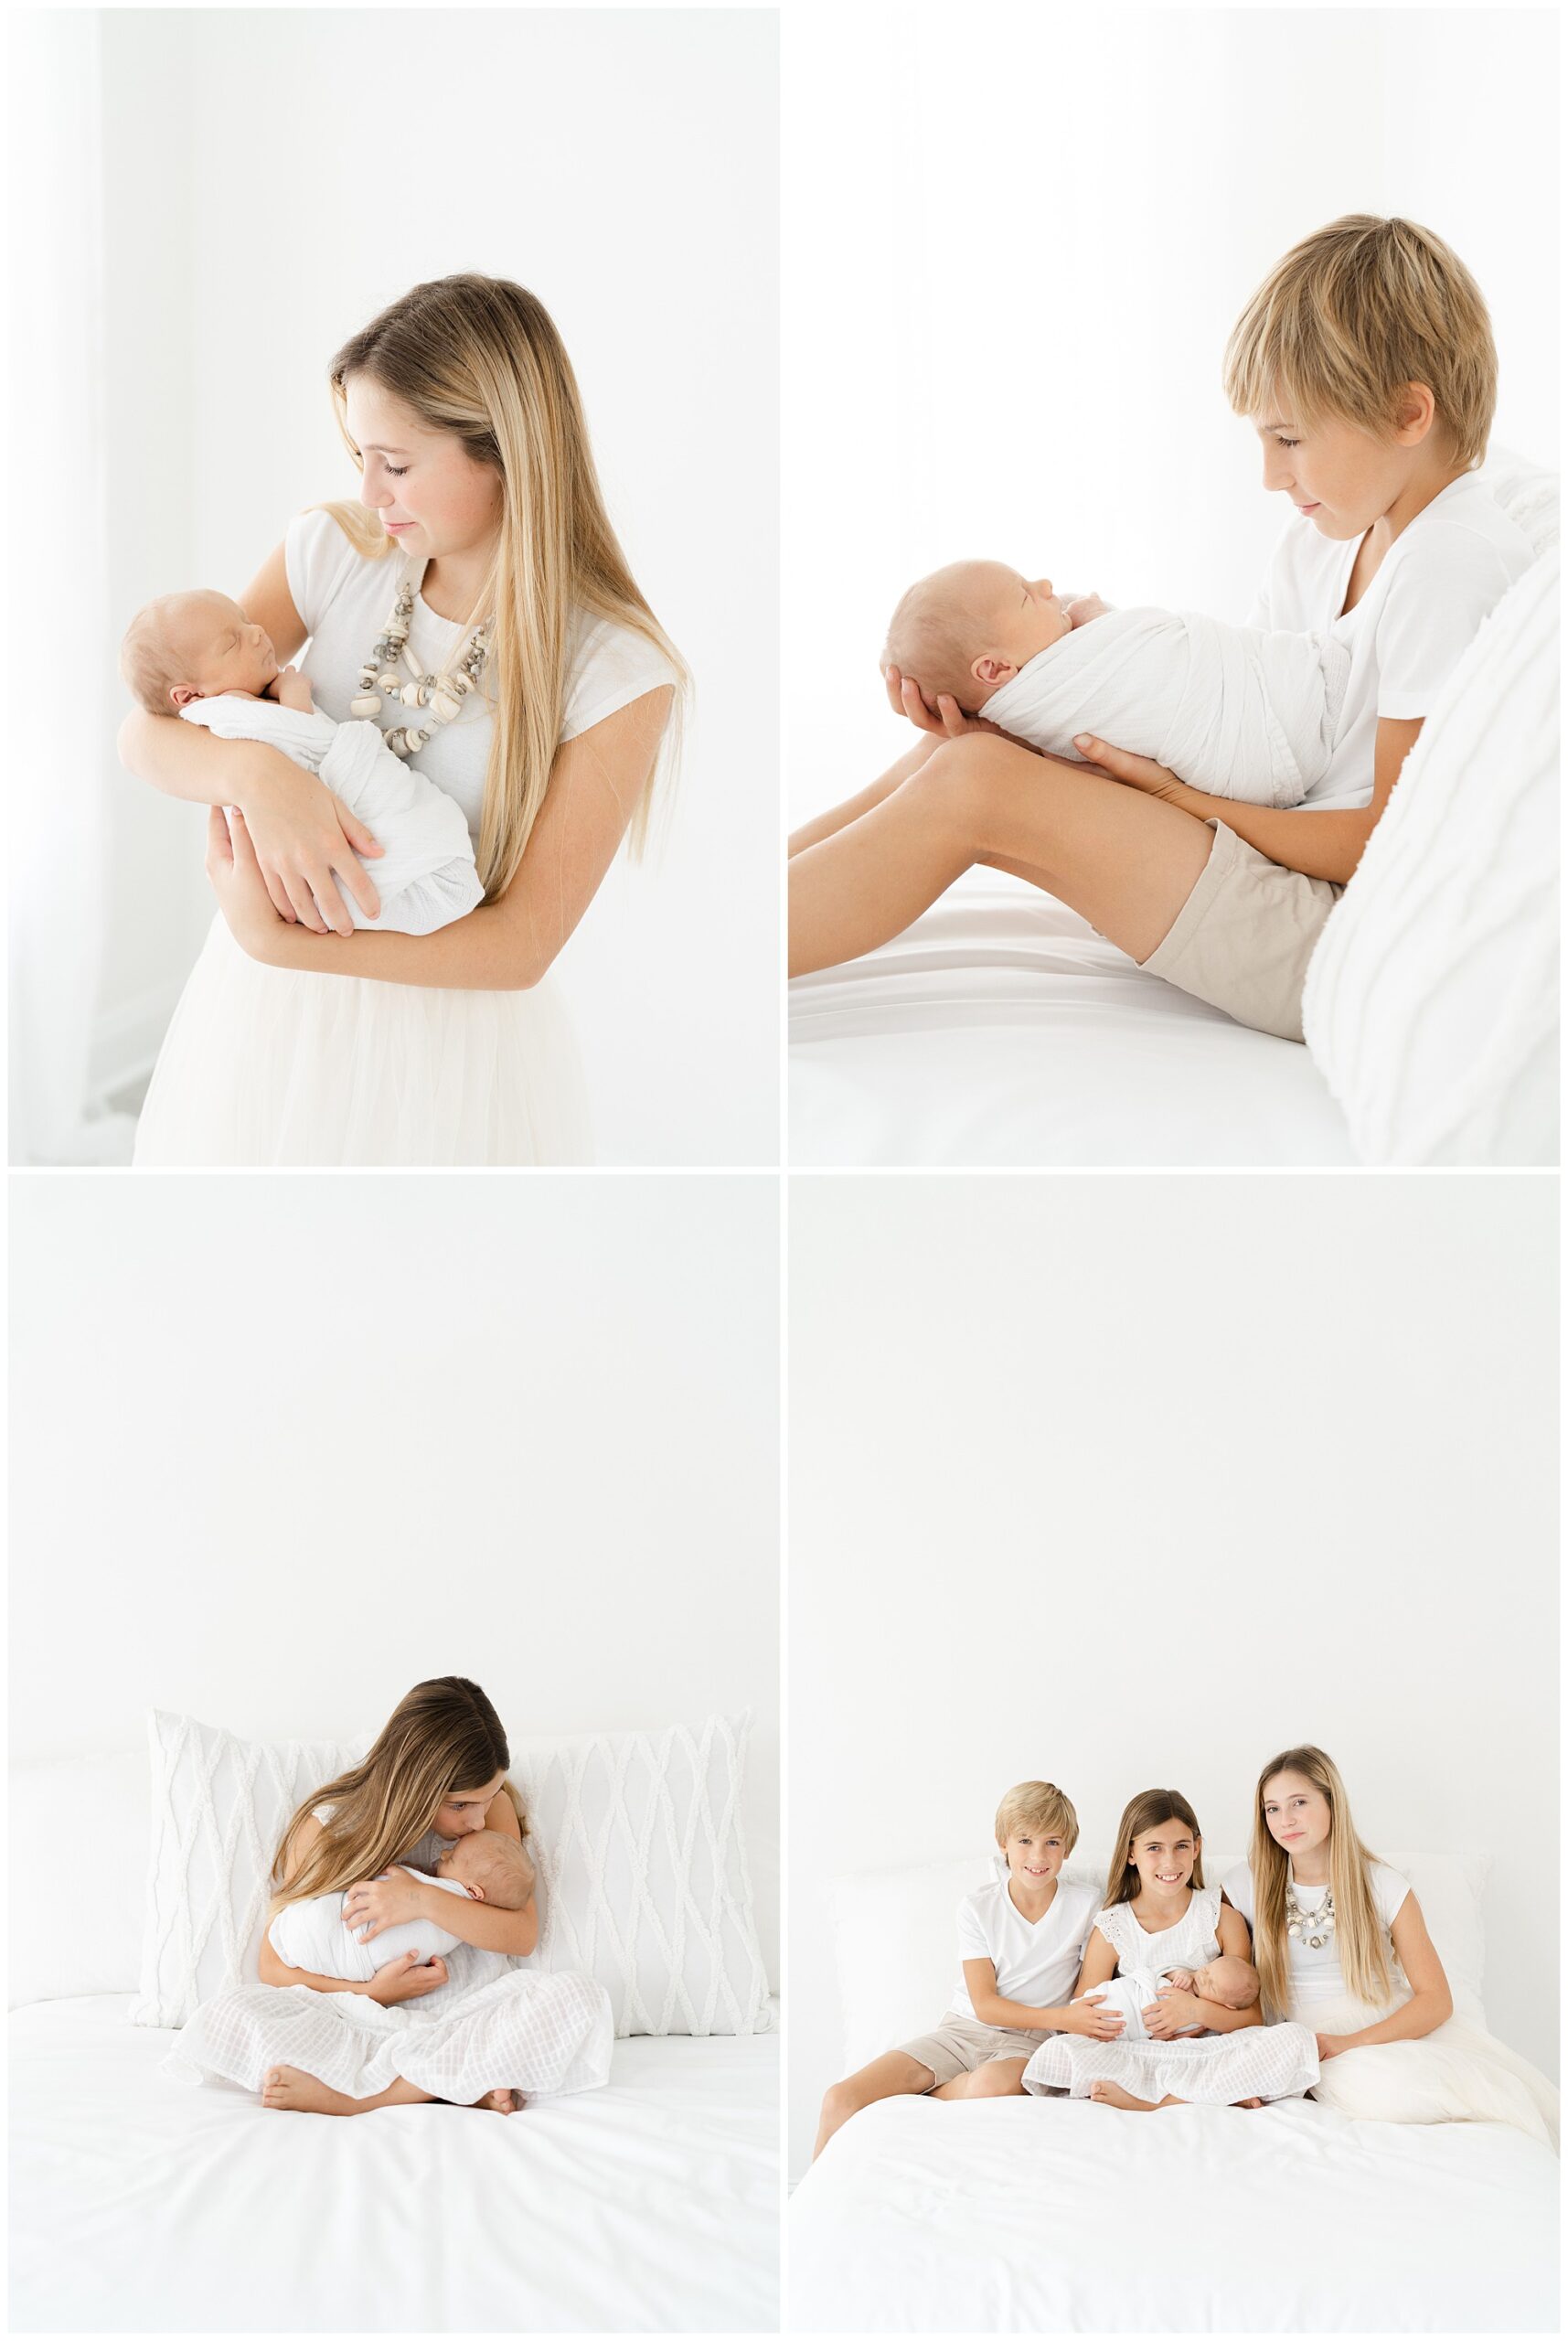 Image collage of a family with three older children and a newborn baby during a photo session with Atlanta newborn photographer Lindsey Powell.